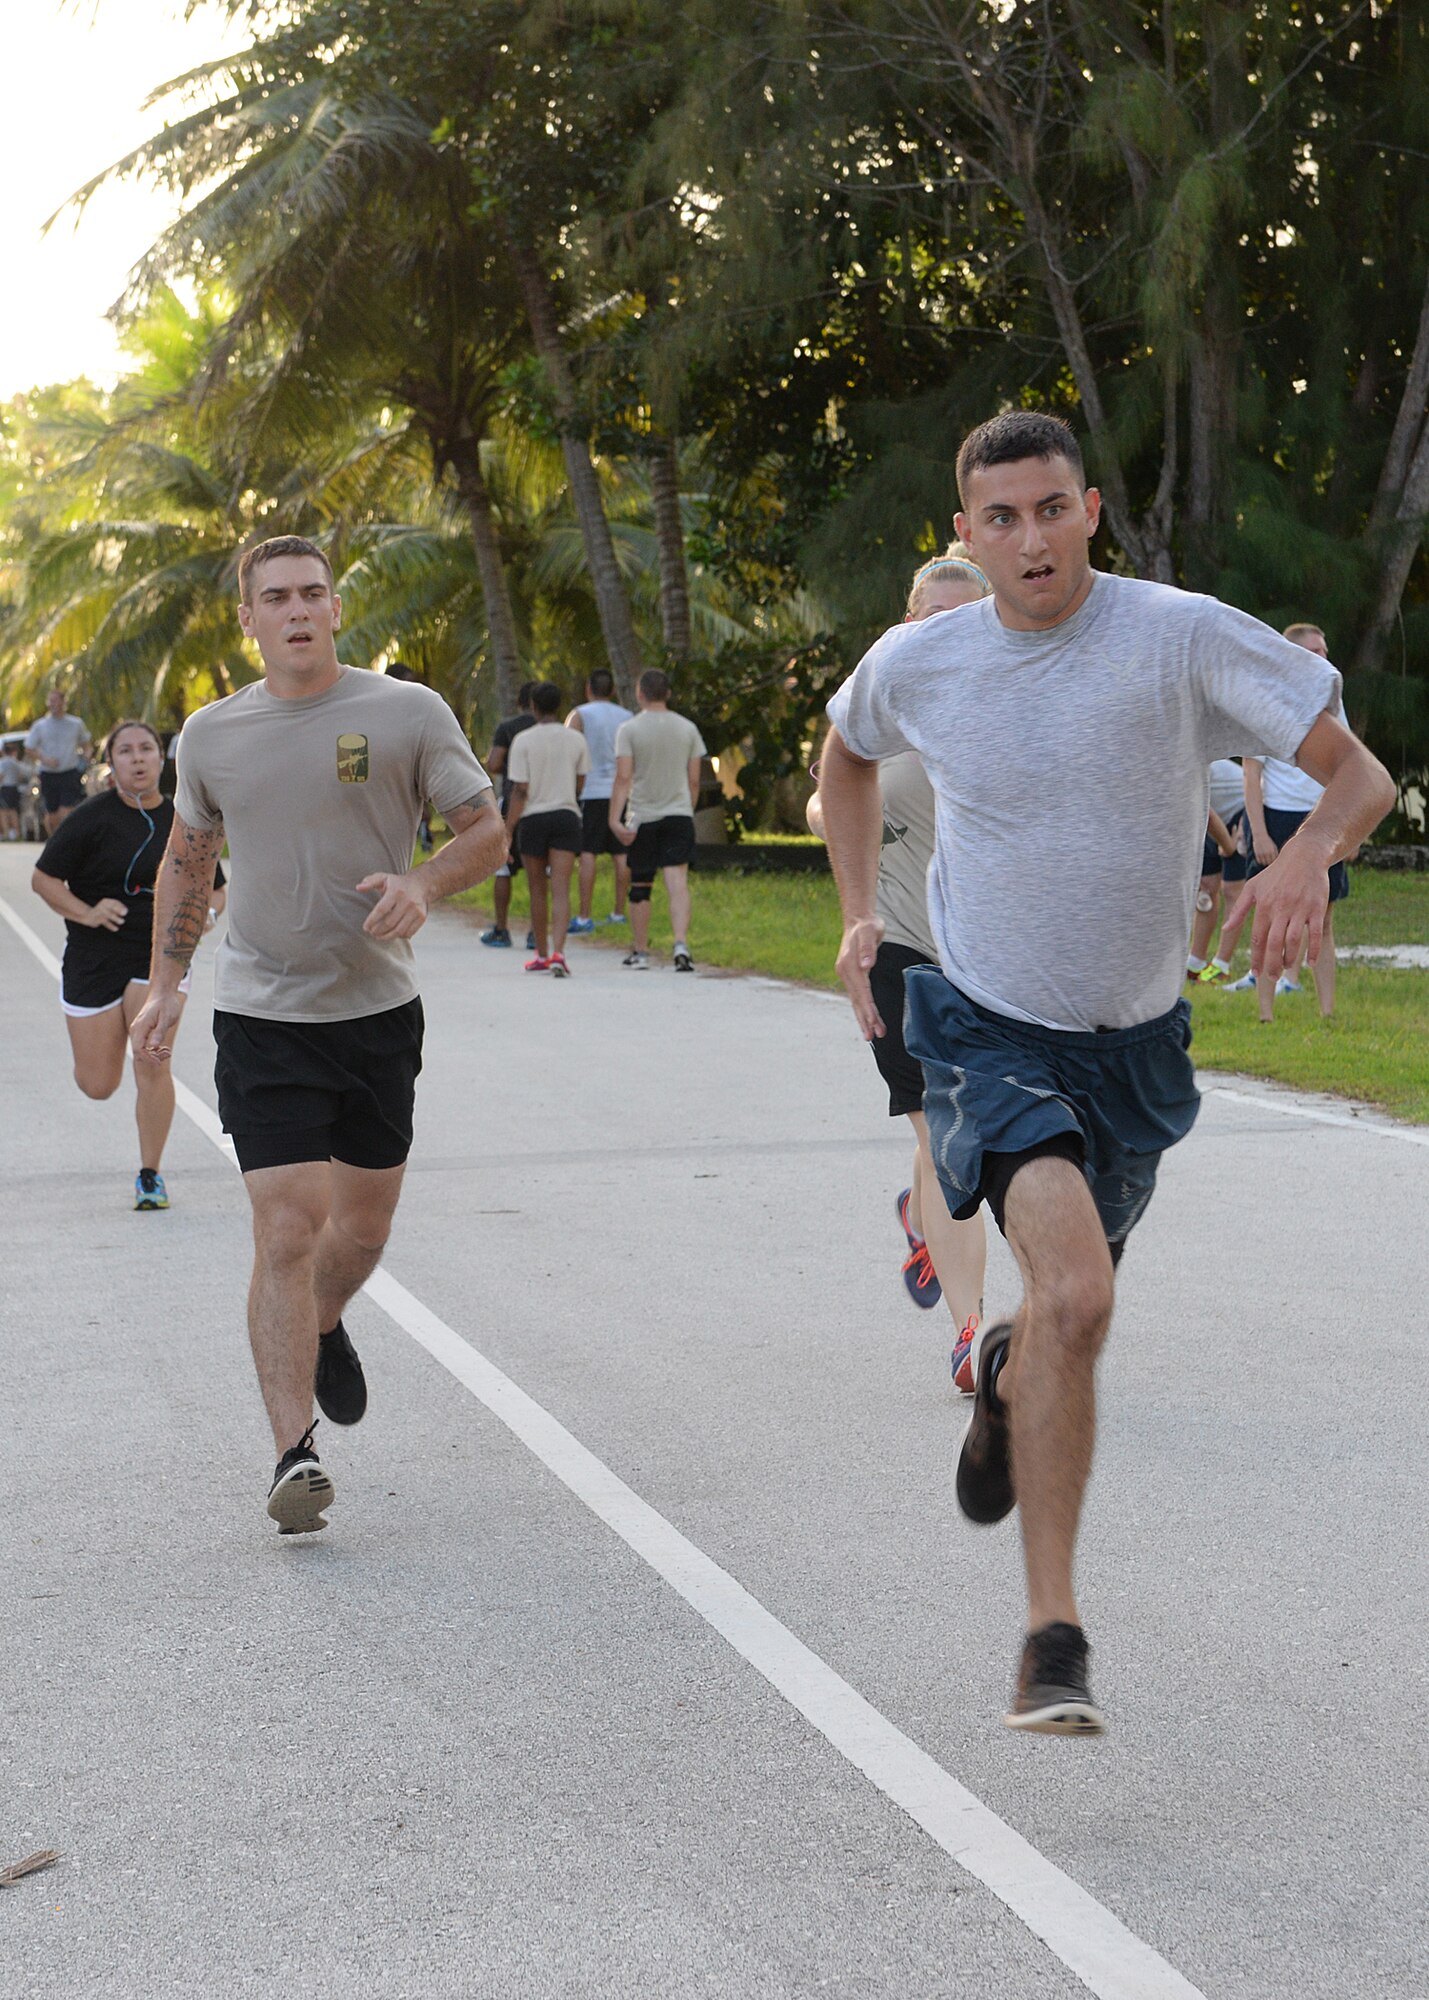 Team Andersen Airmen race to the finish line during the 2014 Gobble Wobble 5K Fun Run Nov. 26, 2014, at Tarague Beach at Andersen Air Force Base, Guam. Airmen participated in the event to build resiliency by focusing on the Comprehensive Airman Fitness pillar of physical fitness. (U.S. Air Force photo by Senior Airman Katrina M. Brisbin/Released)